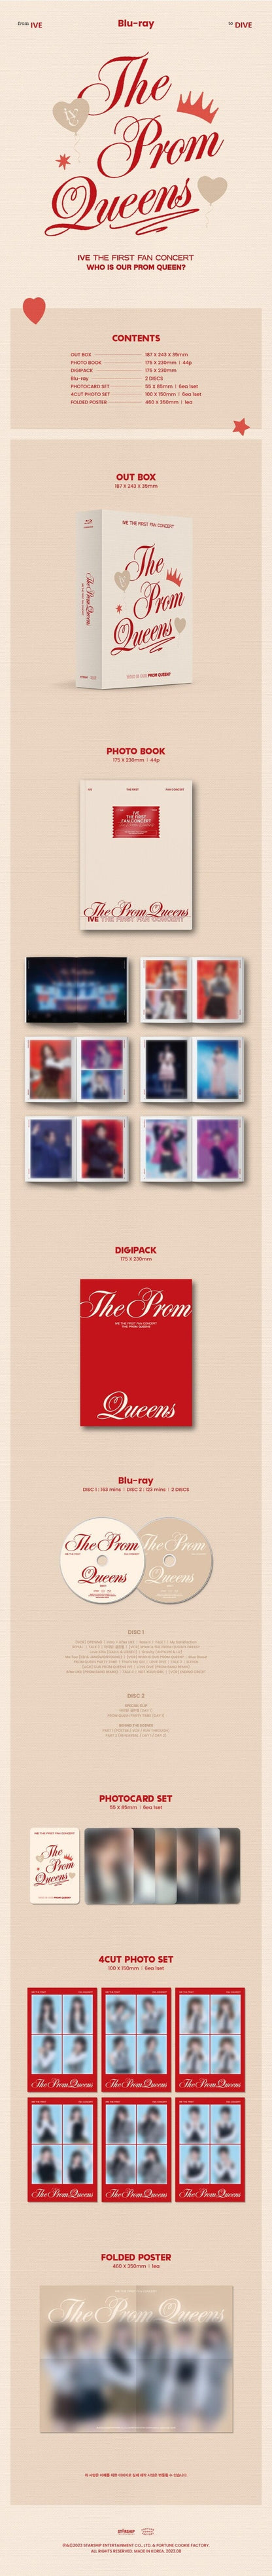 [PREORDER] STARSHIP IVE - THE FIRST FAN CONCERT [THE PROM QUEENS] BLU-RAY